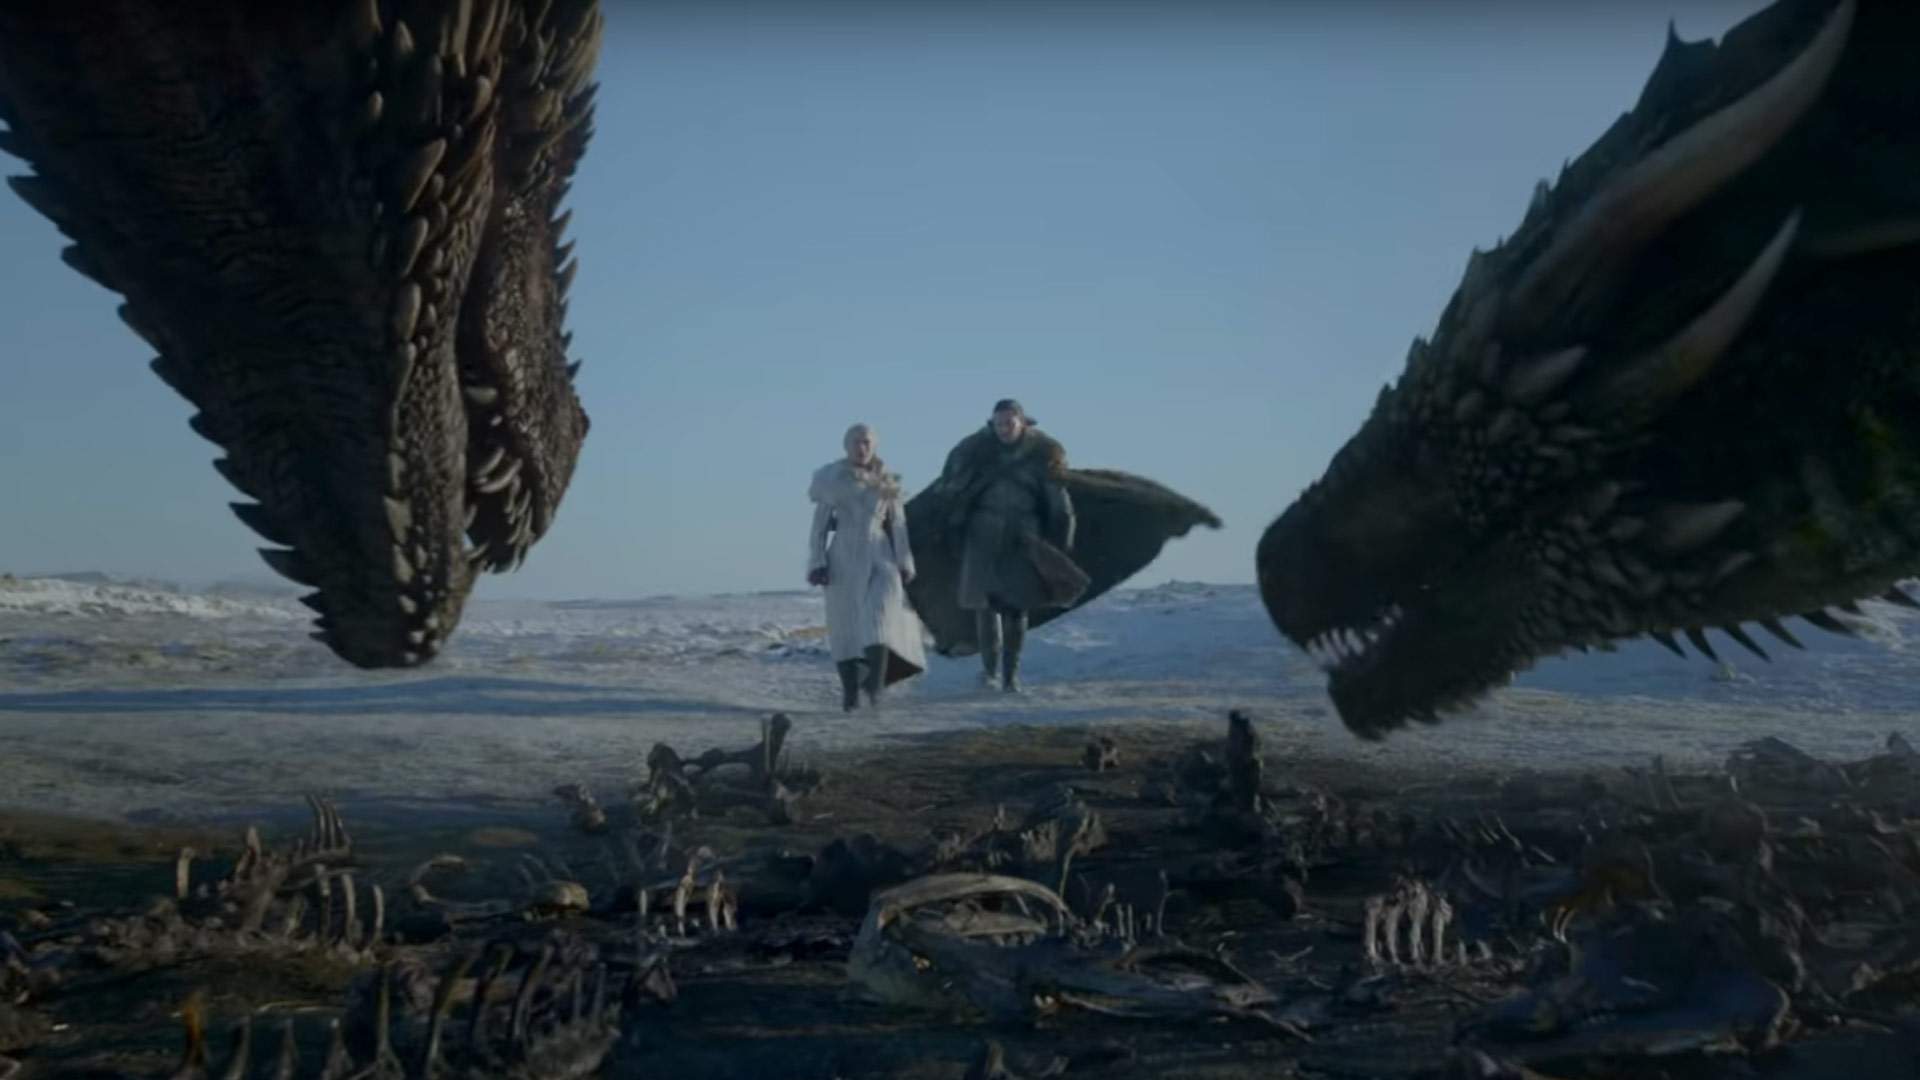 The First Full Trailer for the Final Season of 'Game of Thrones' Has Finally Dropped